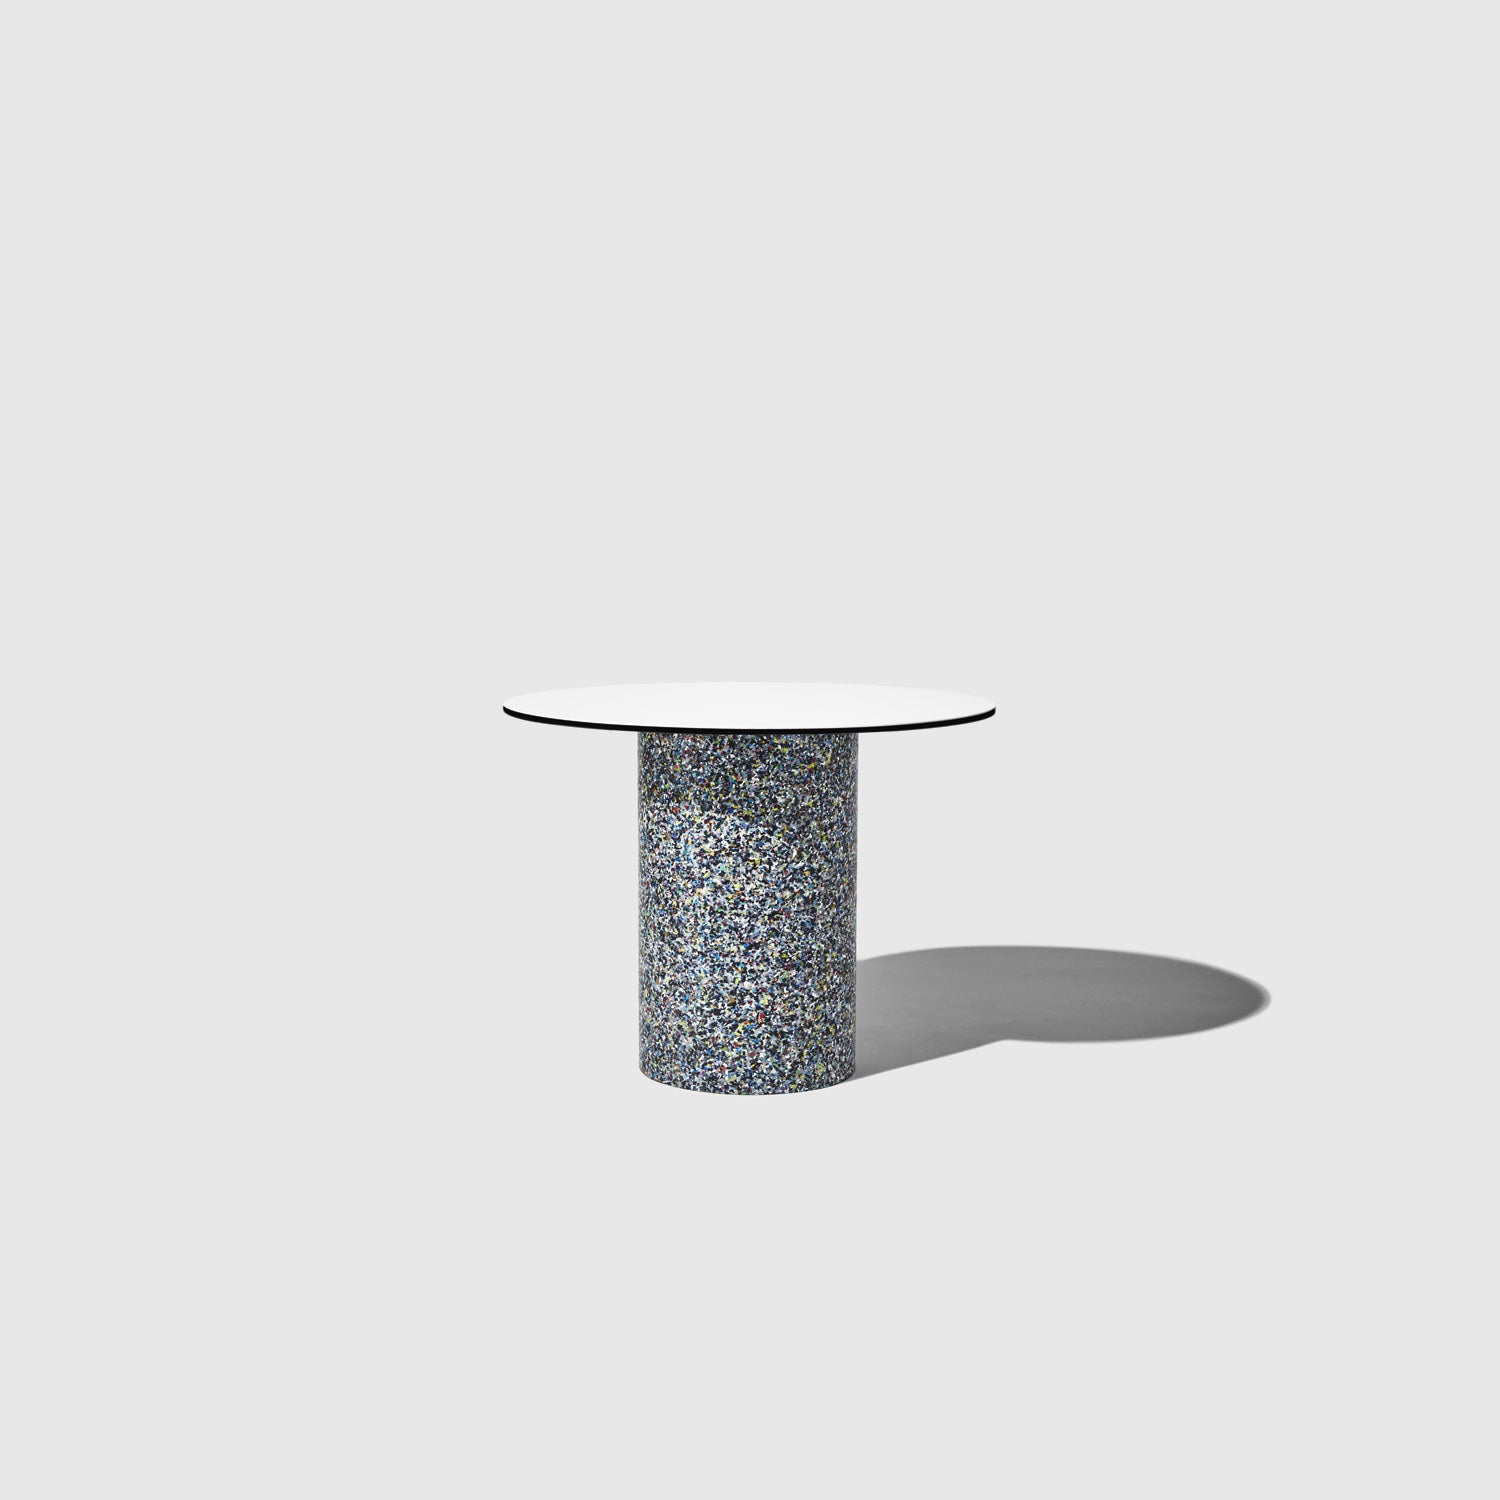 Confetti Round Dining Table | 100% Recycled Plastic Indoor/Outdoor Furniture Pedestal Base | DesignByThem | GibsonKarlo